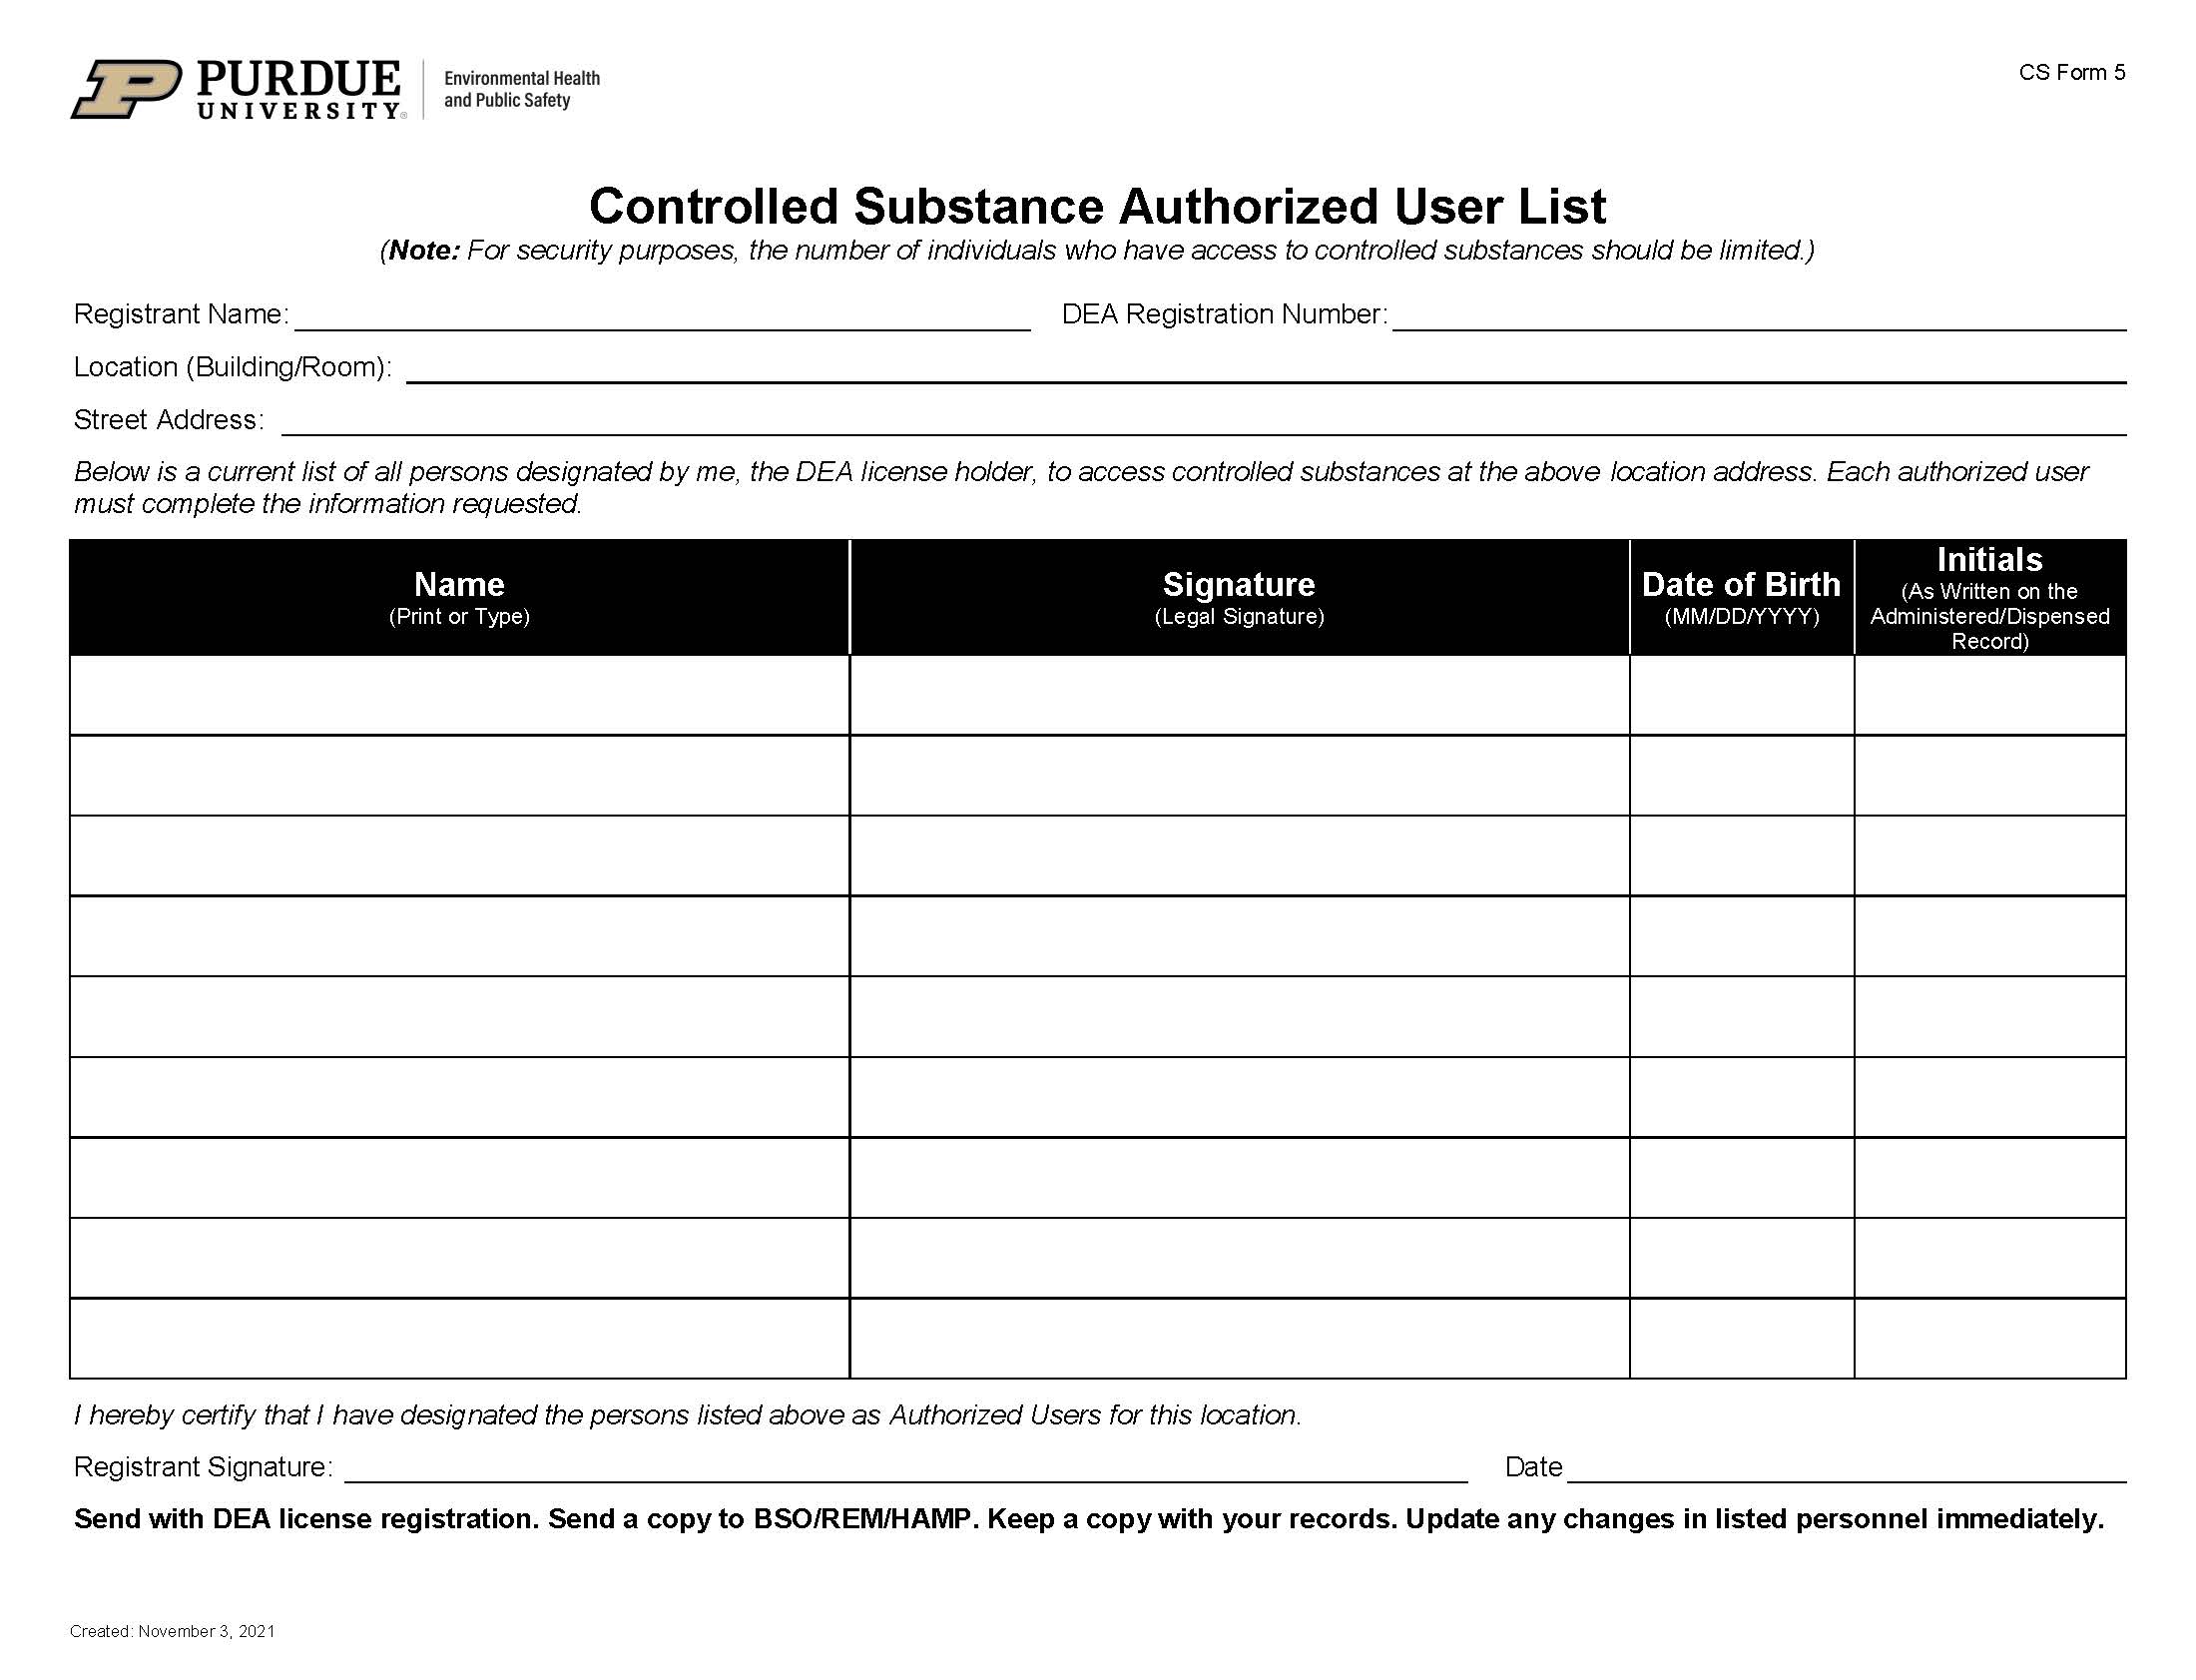 clickable link to controlled substance authorized users list